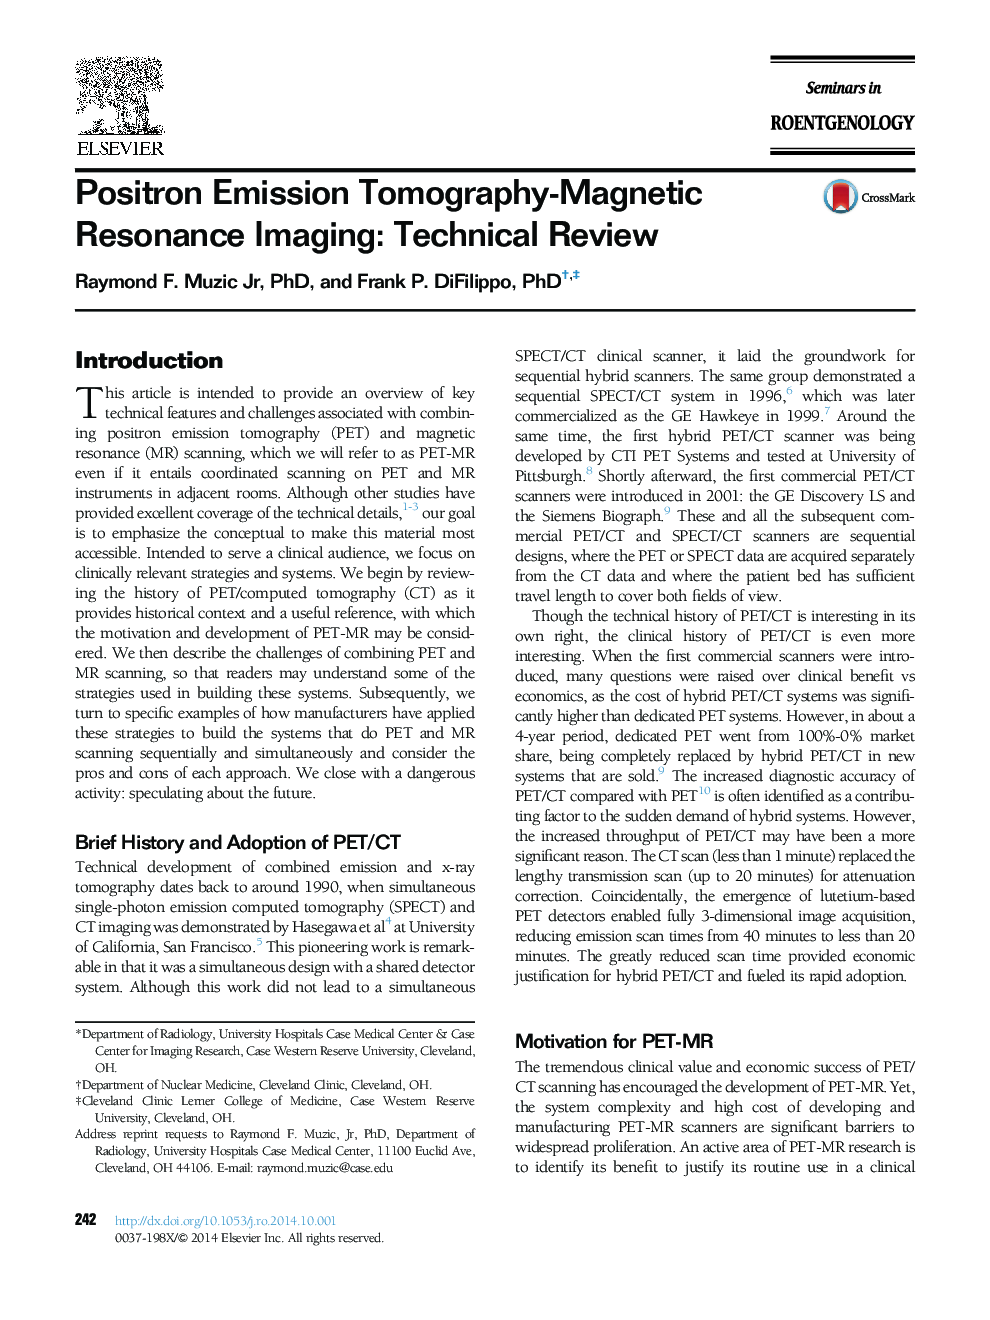 Positron Emission Tomography-Magnetic Resonance Imaging: Technical Review